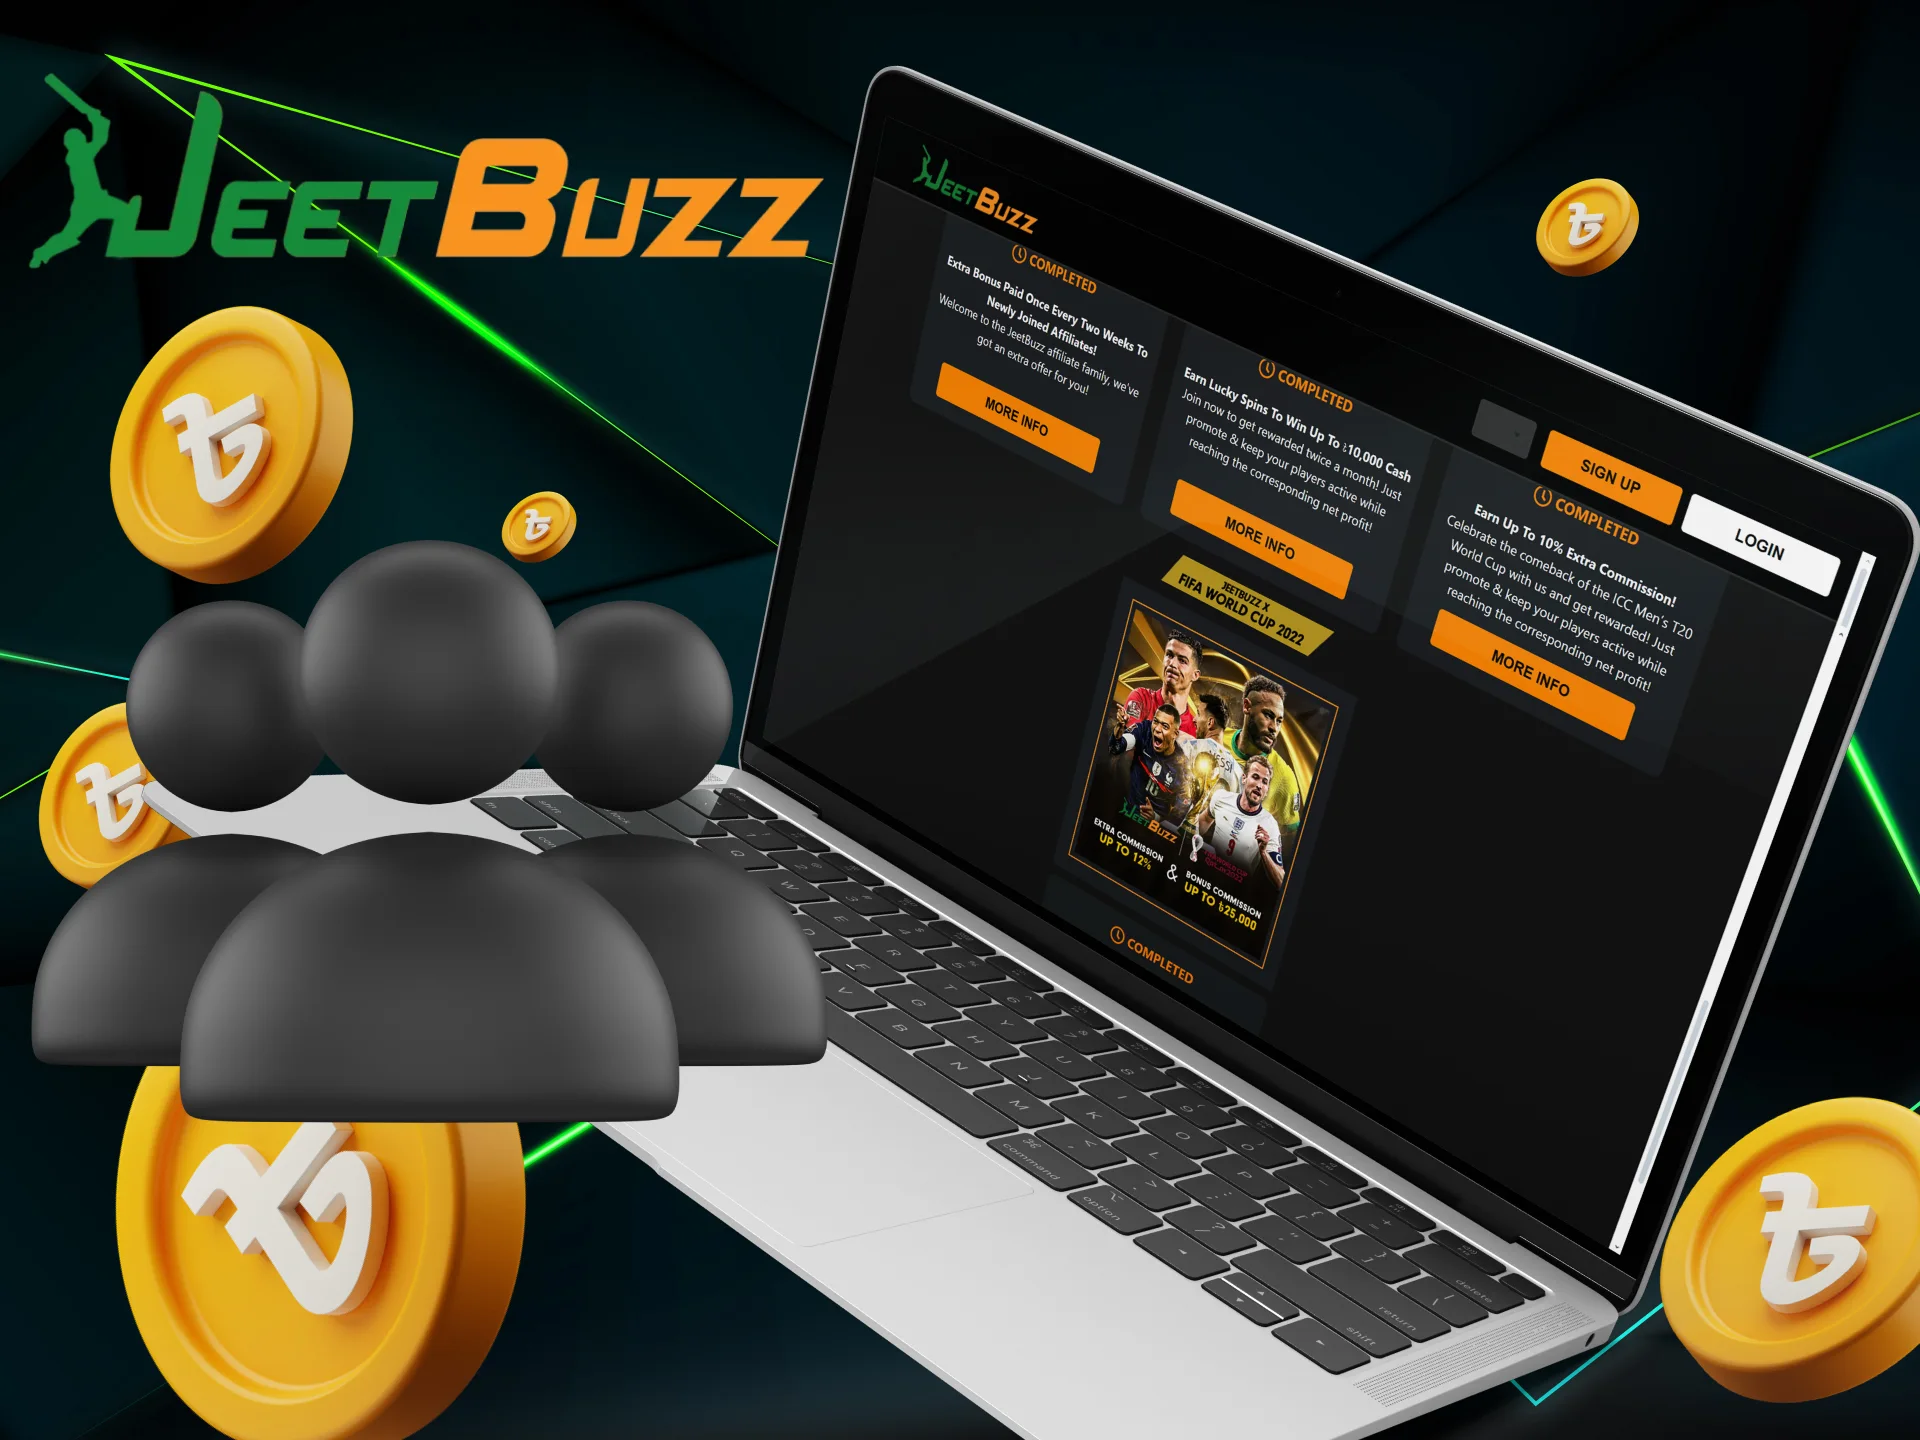 There are a number of reasons why you should join the JeetBuzz affiliate program.